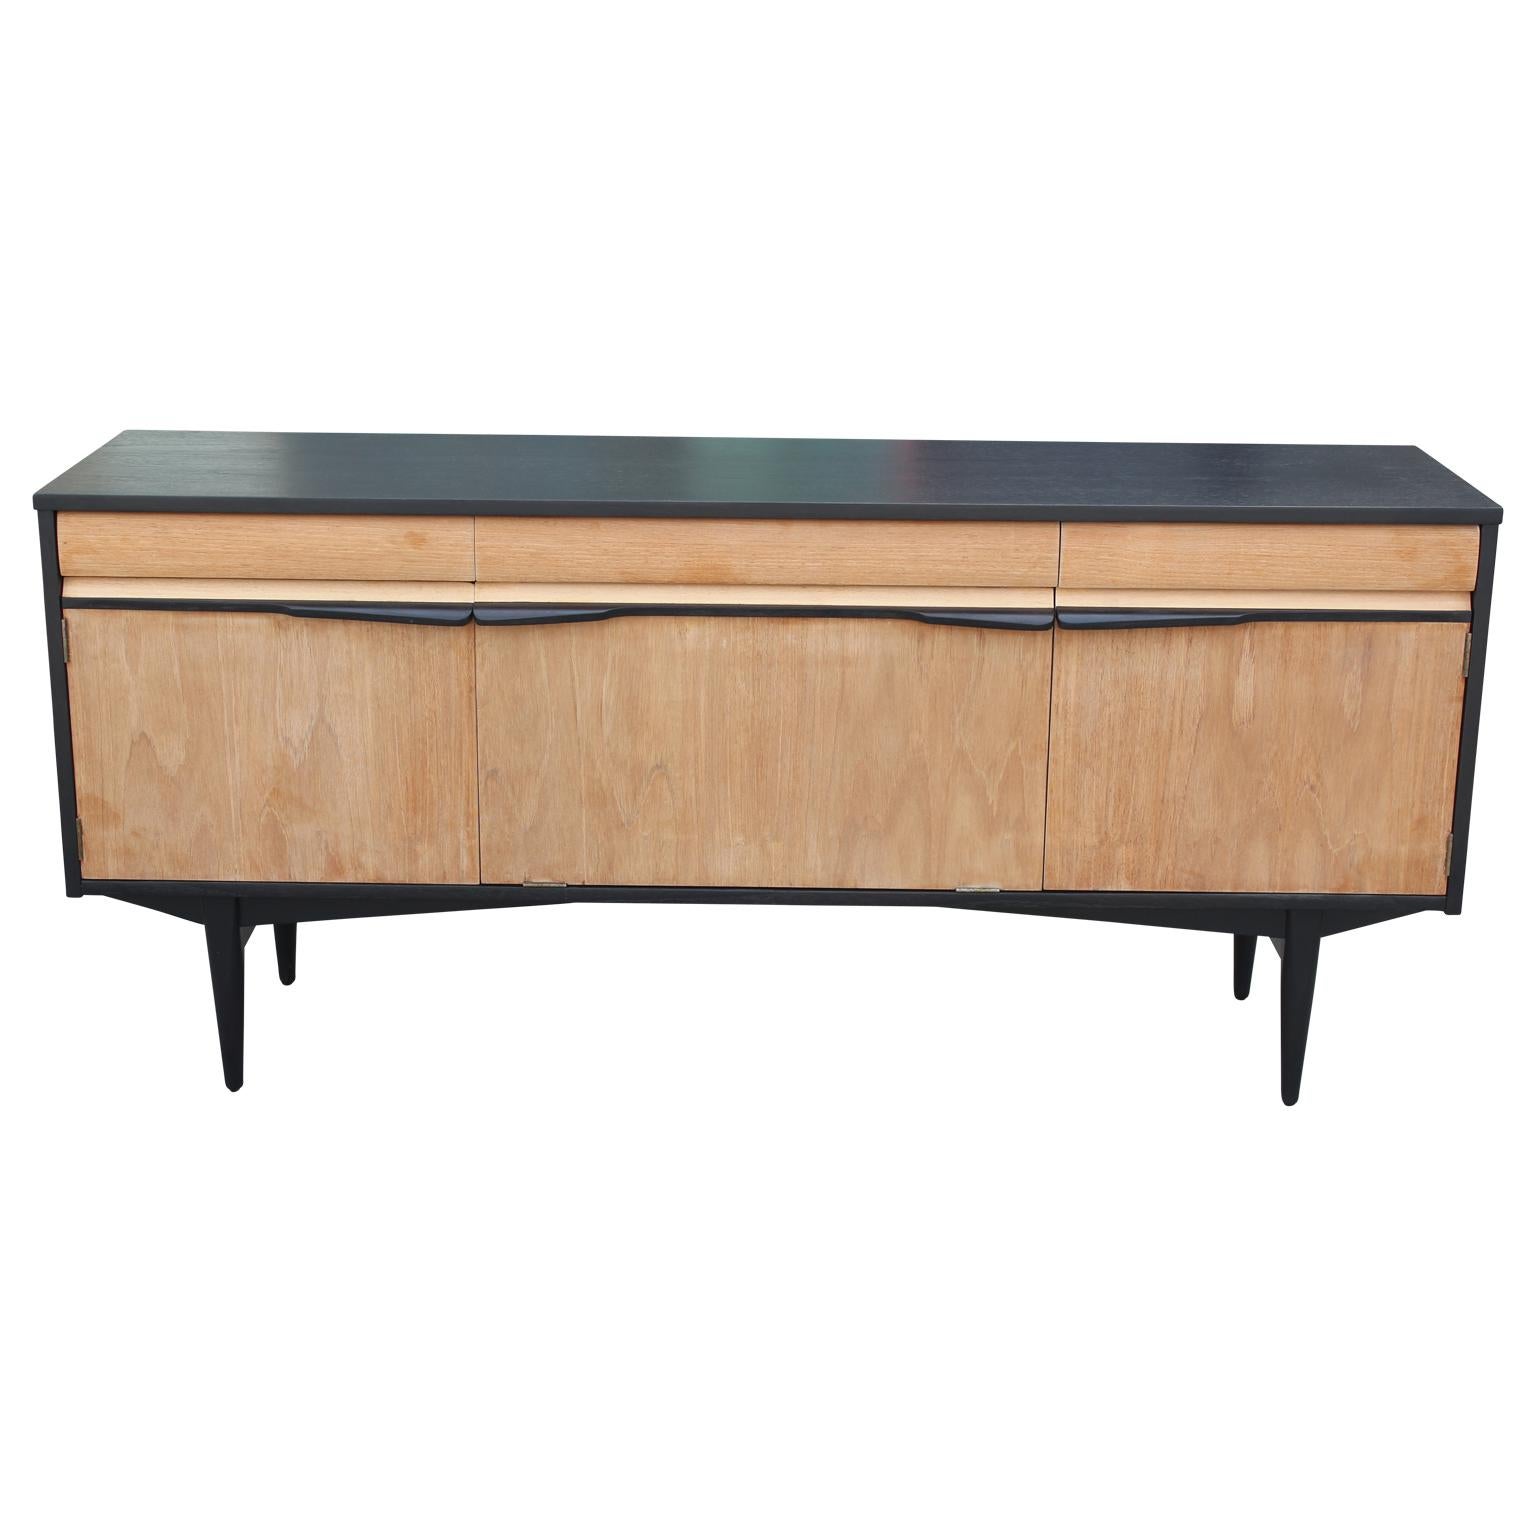 Gorgeous Mid-Century Modern credenza or sideboard featuring beautiful clean lines and freshly refinished with a two-tone look. Features three drawers across the top, one including dividers.